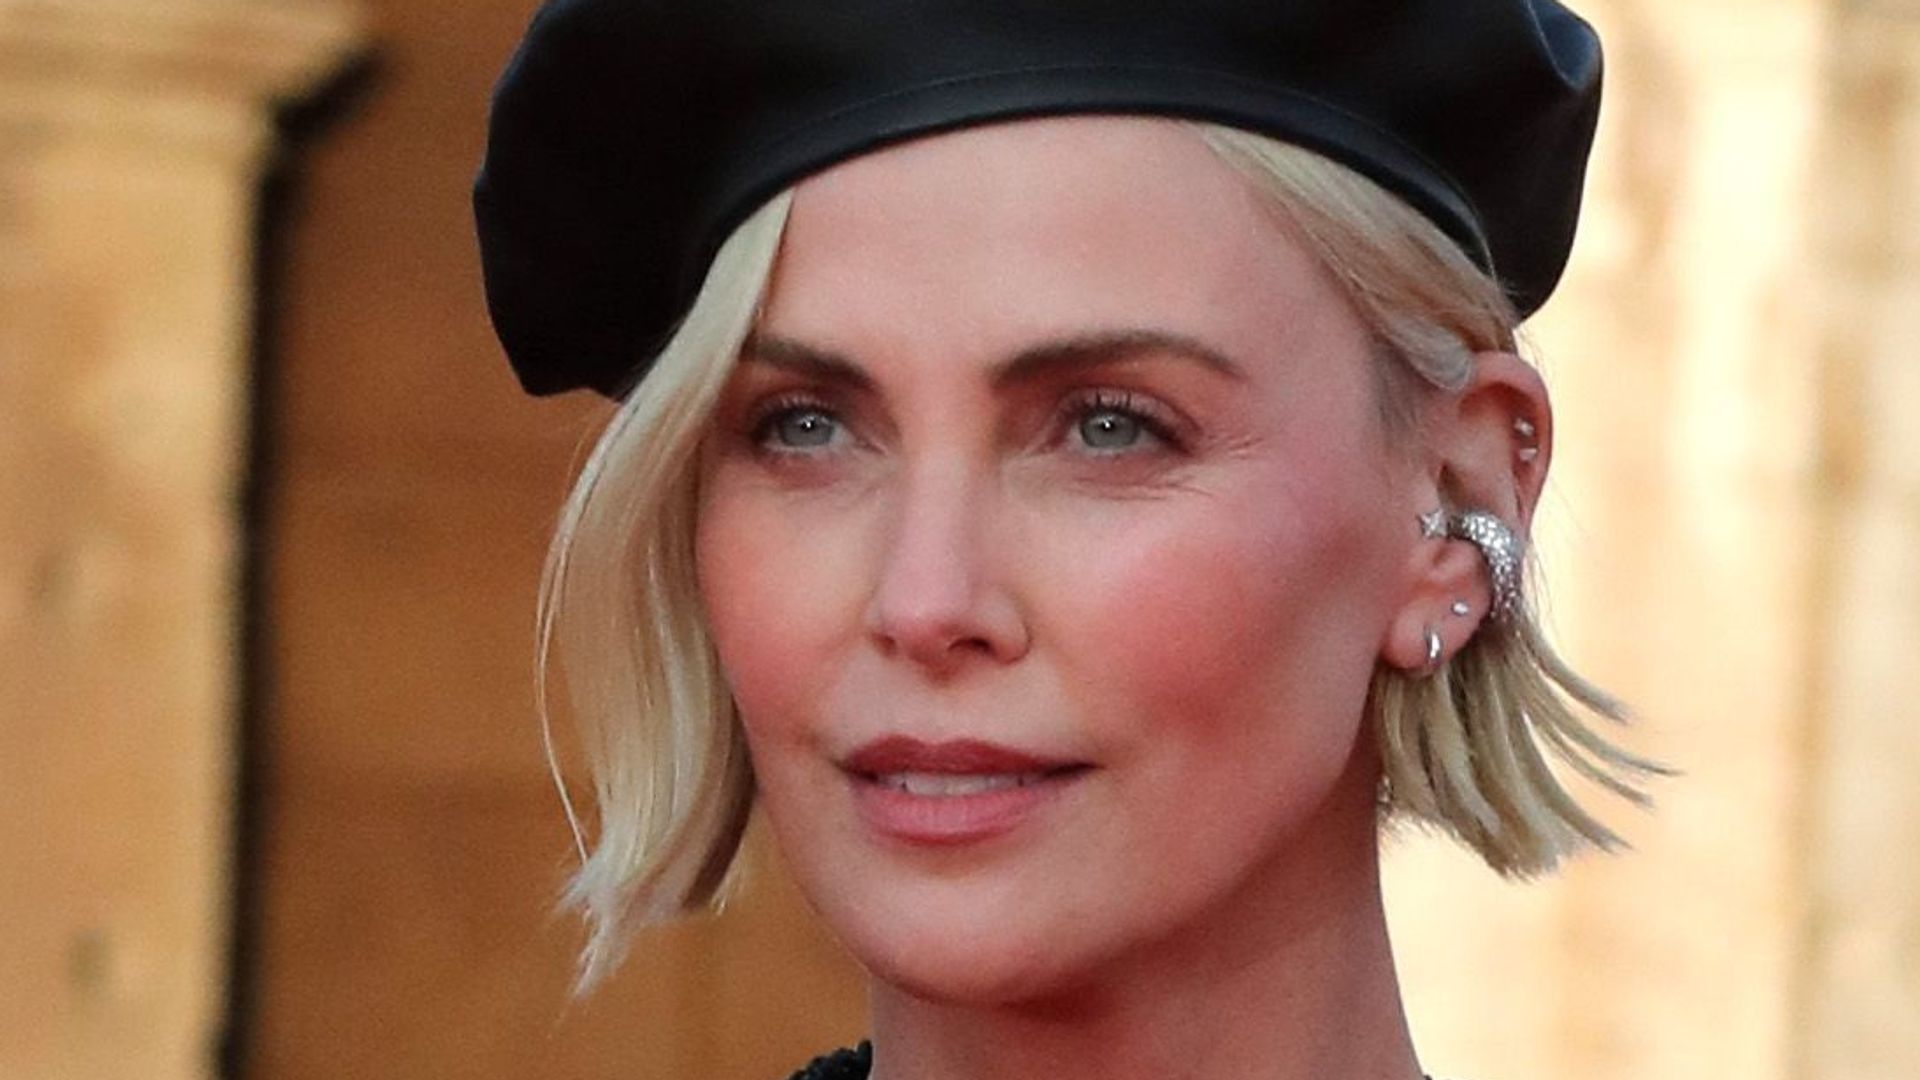 Charlize Therons Phenomenal Sheer Gown May Be Her Most Daring Look Yet See Jaw Dropping Photo 